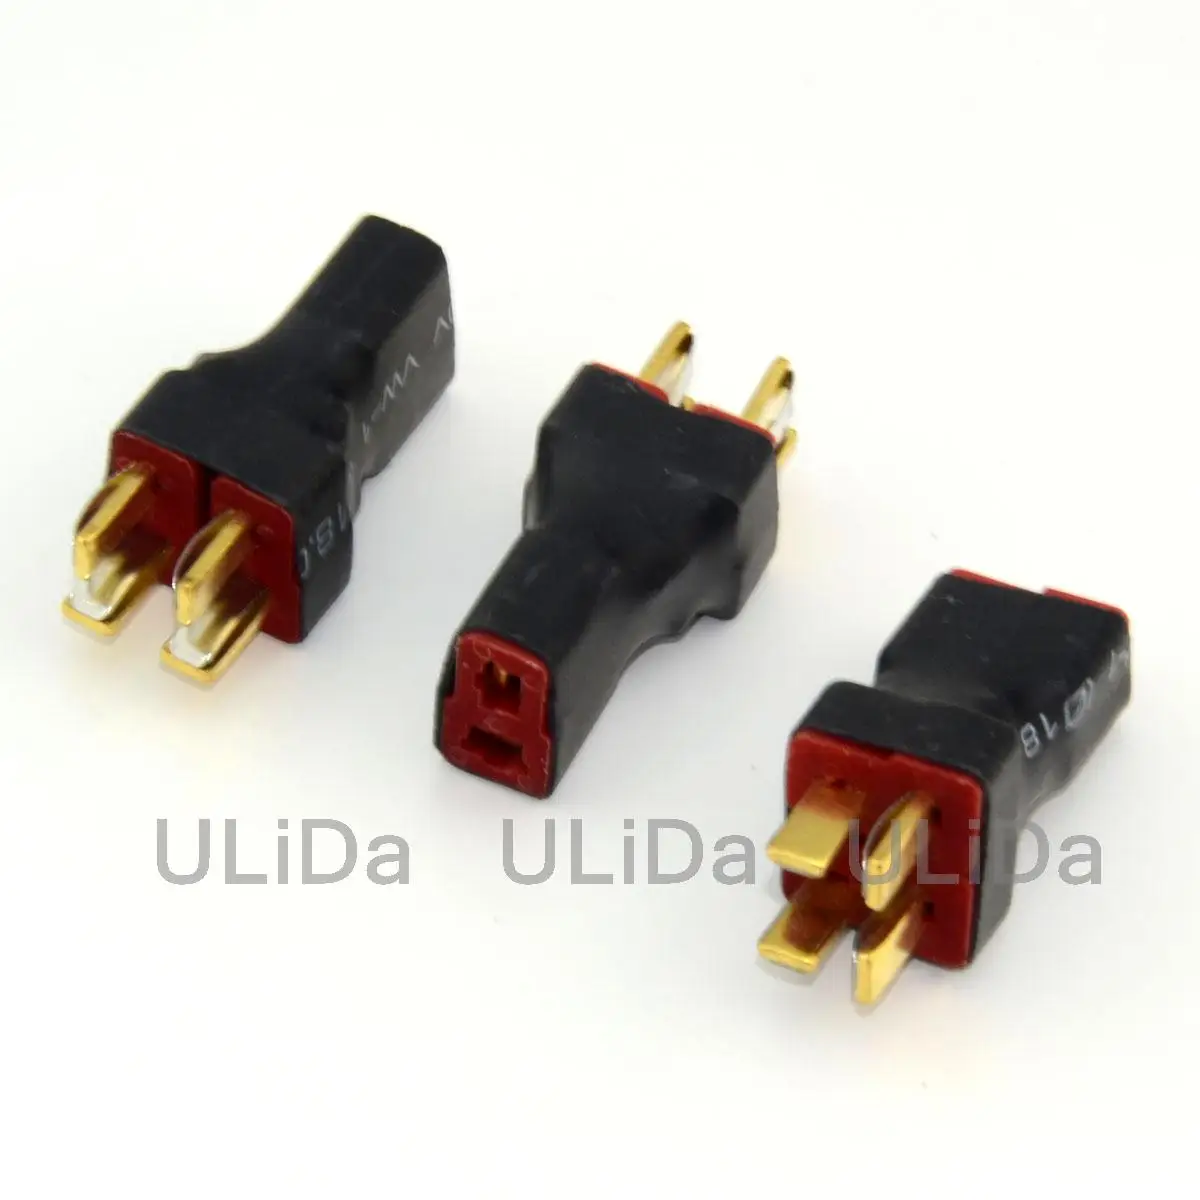 

3x New Deans xt wireless Parallel T-Plug No Wire Adapter T-connector RC Battery